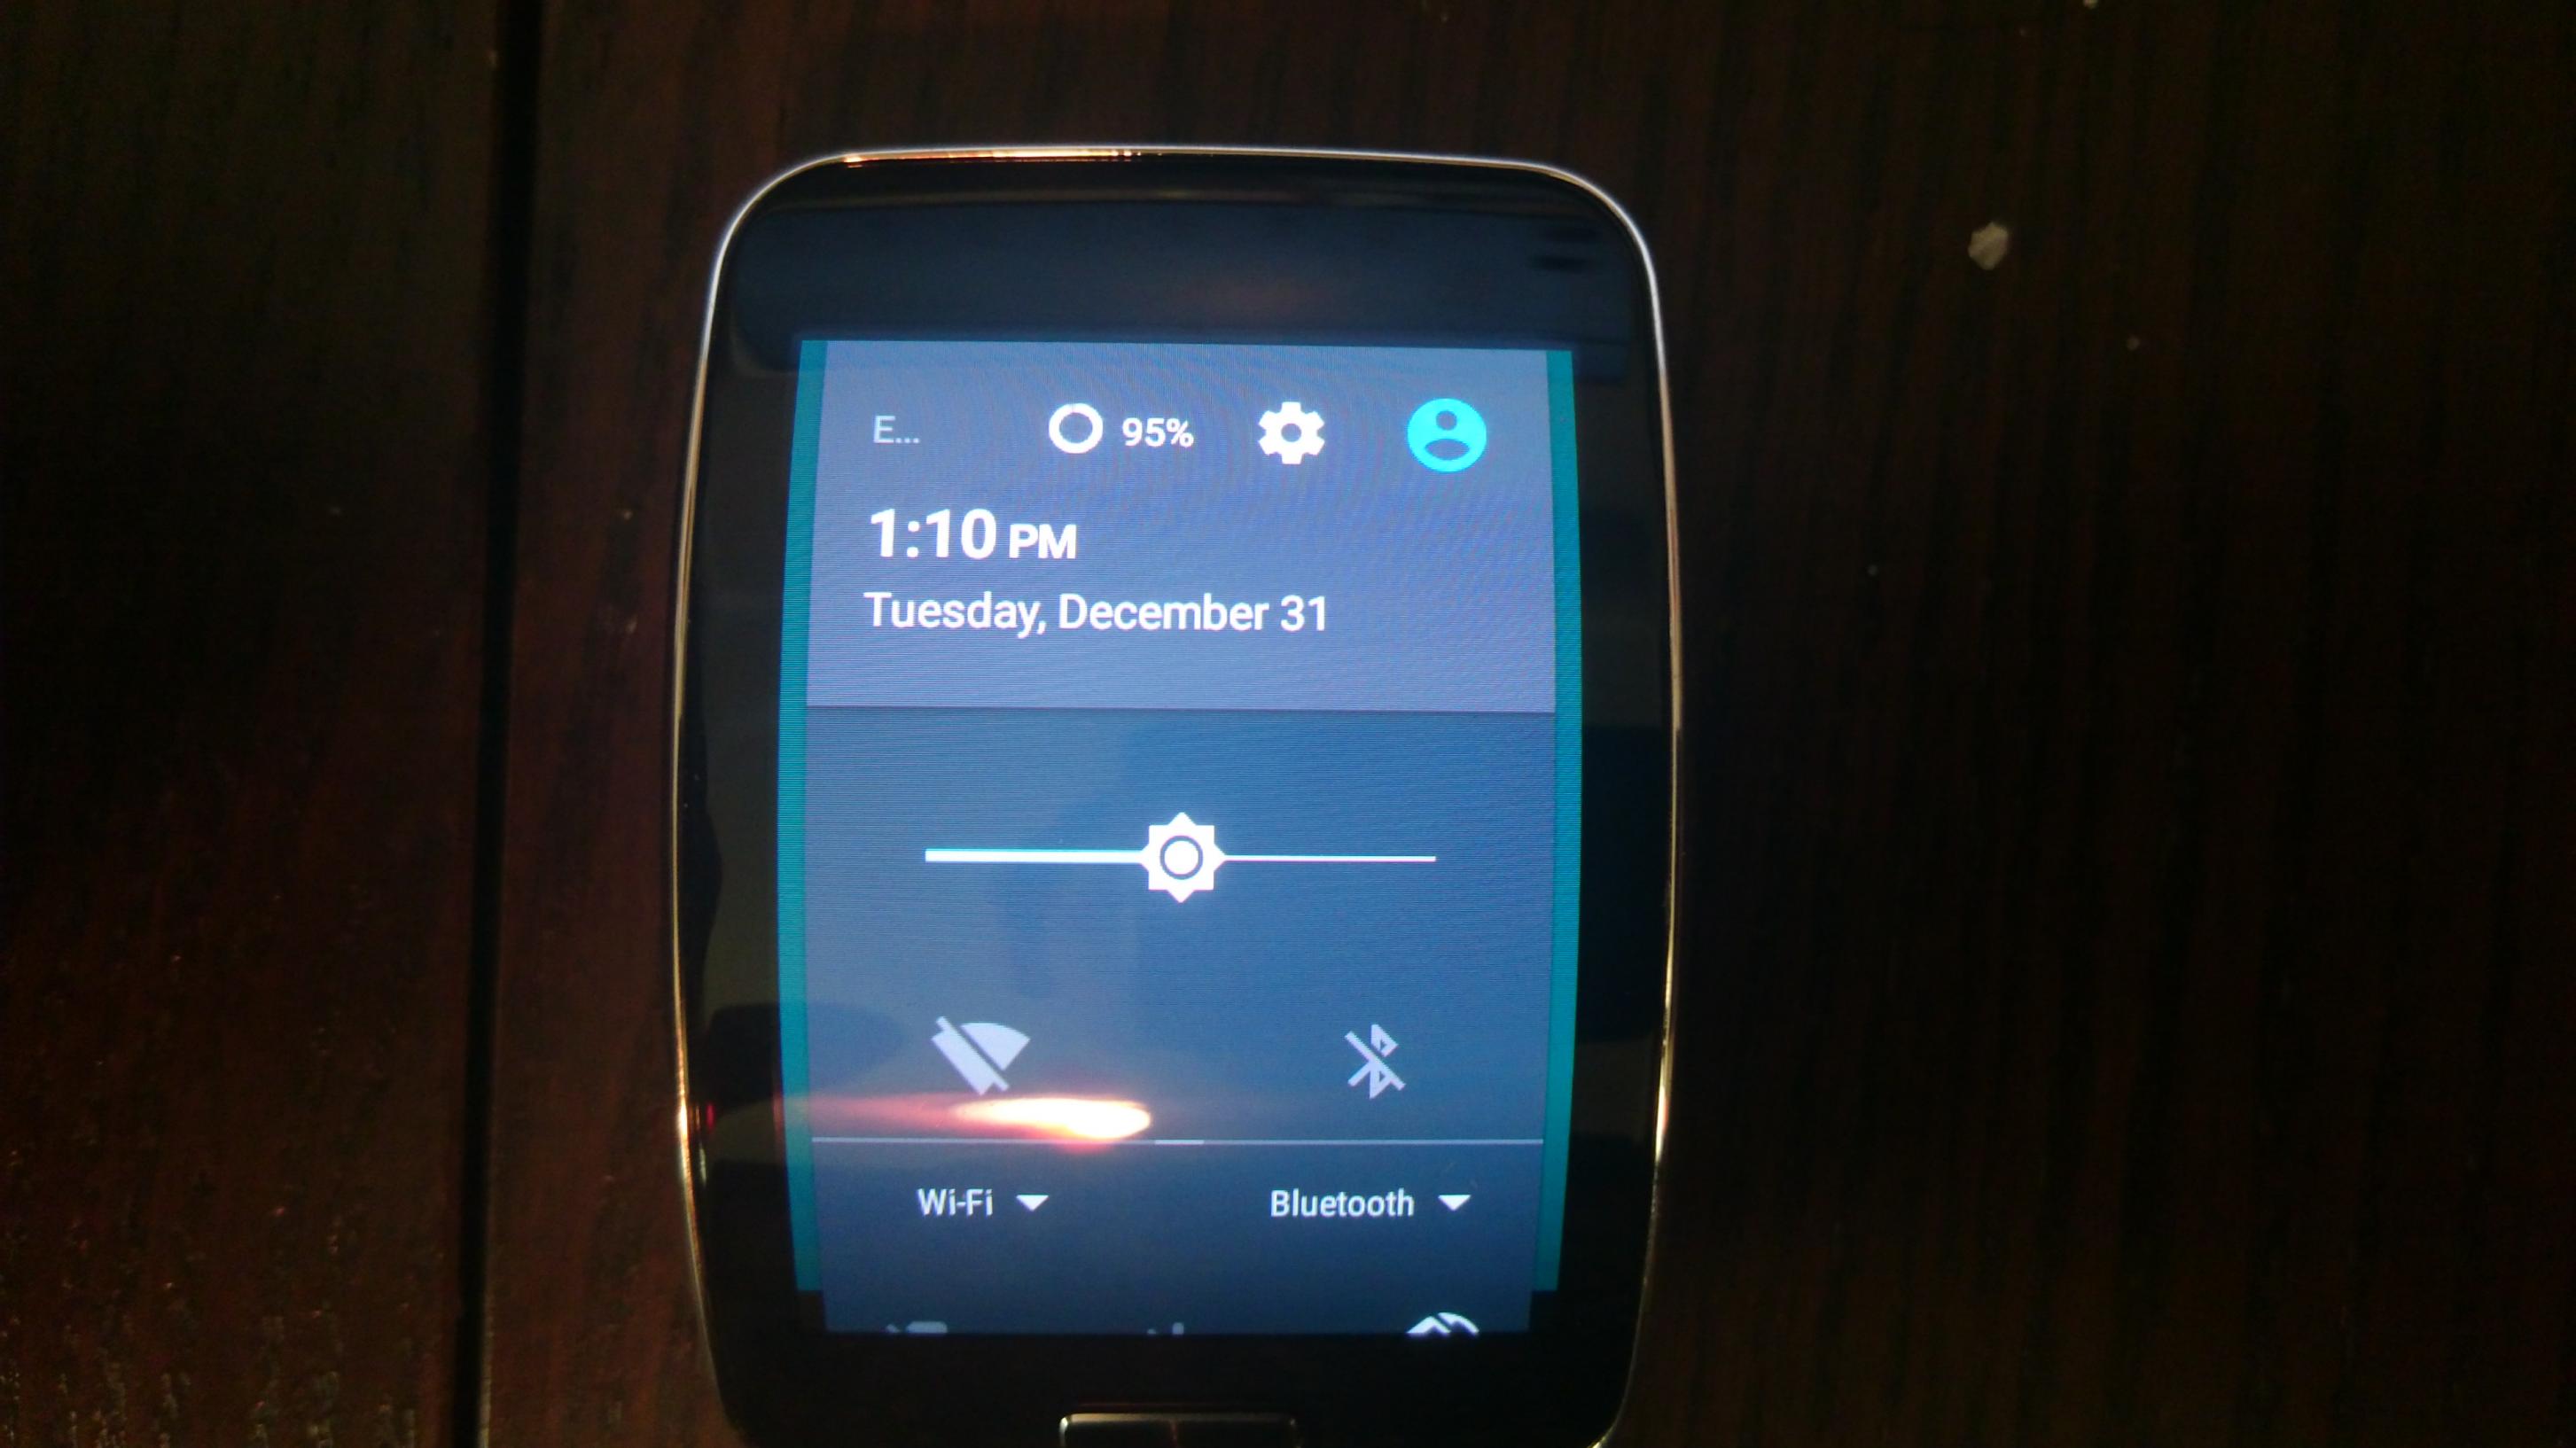 gear s android wear